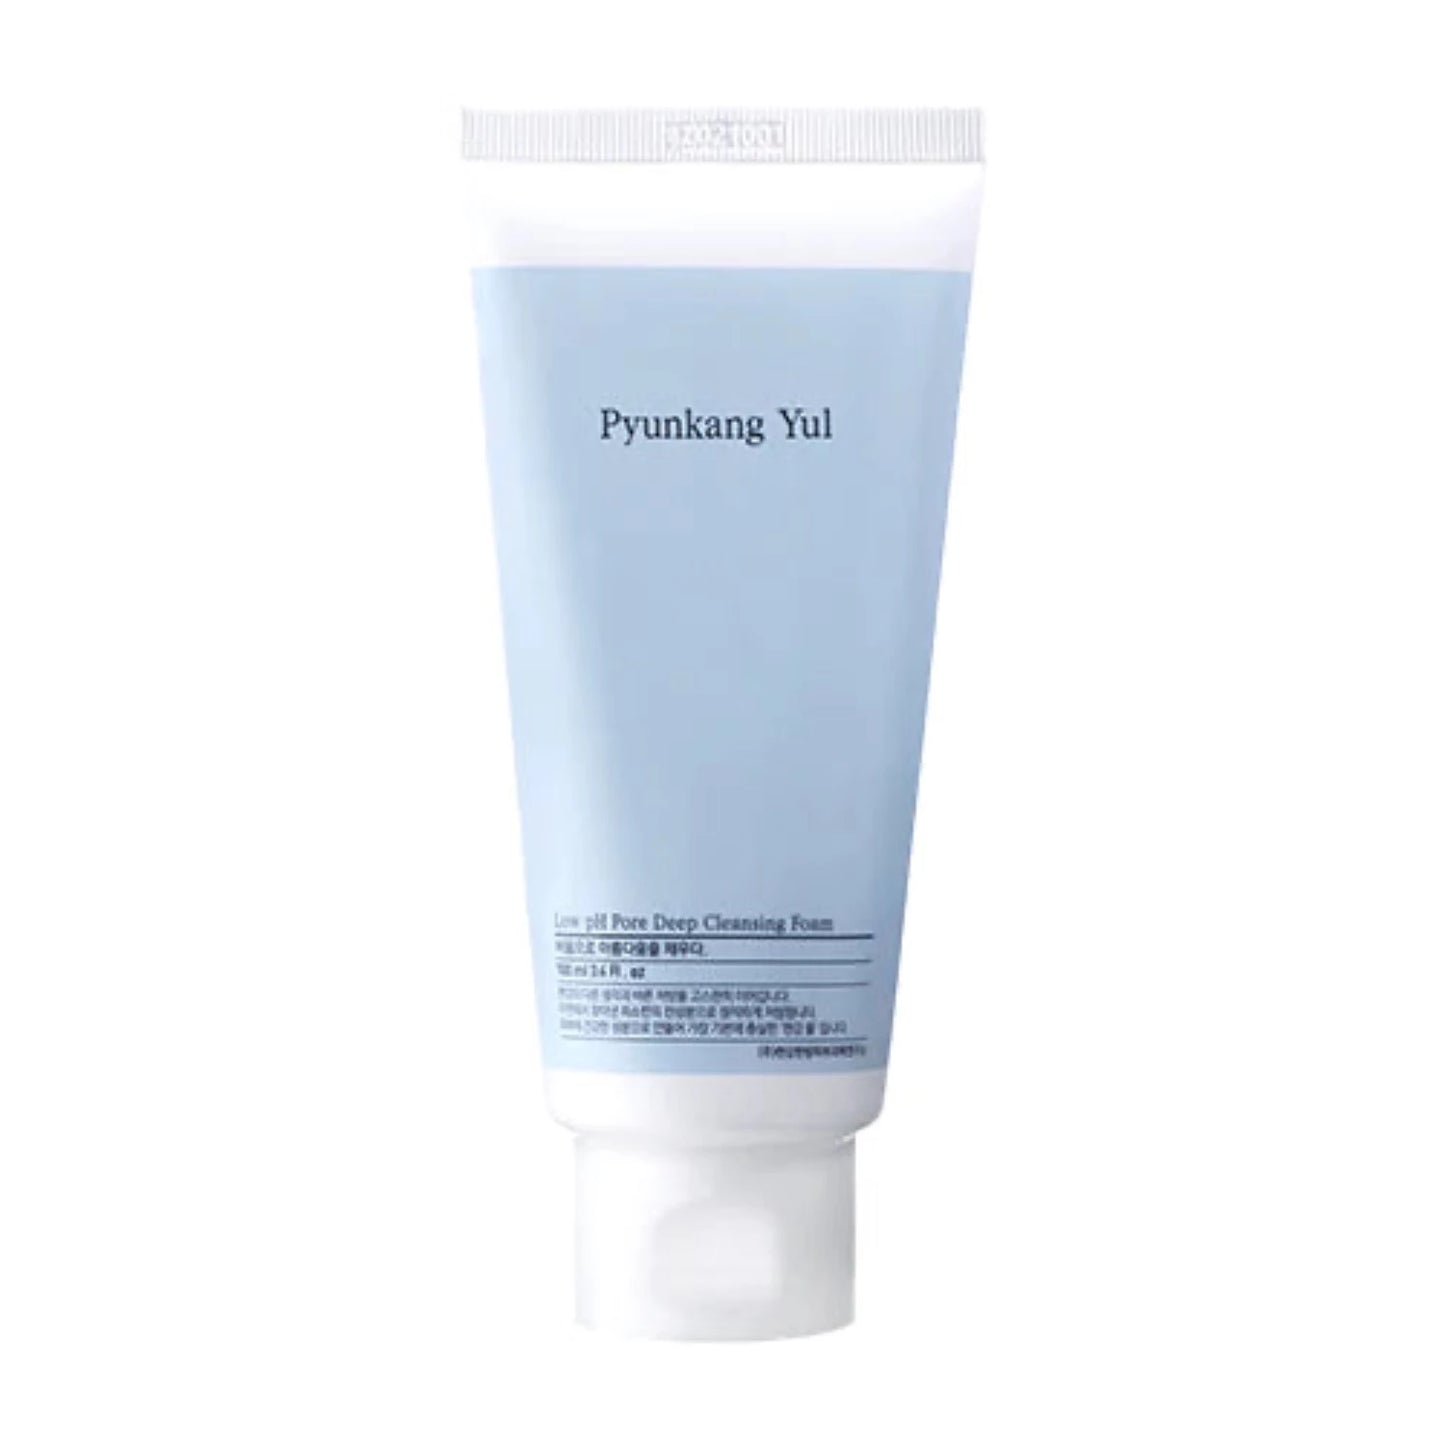 Pyunkang Yul Low pH Pore Deep Cleansing Foam it effectively dissolves dirt, impurities and makeup with the help of natural surfactants that are balanced to the skin's natural pH level. 